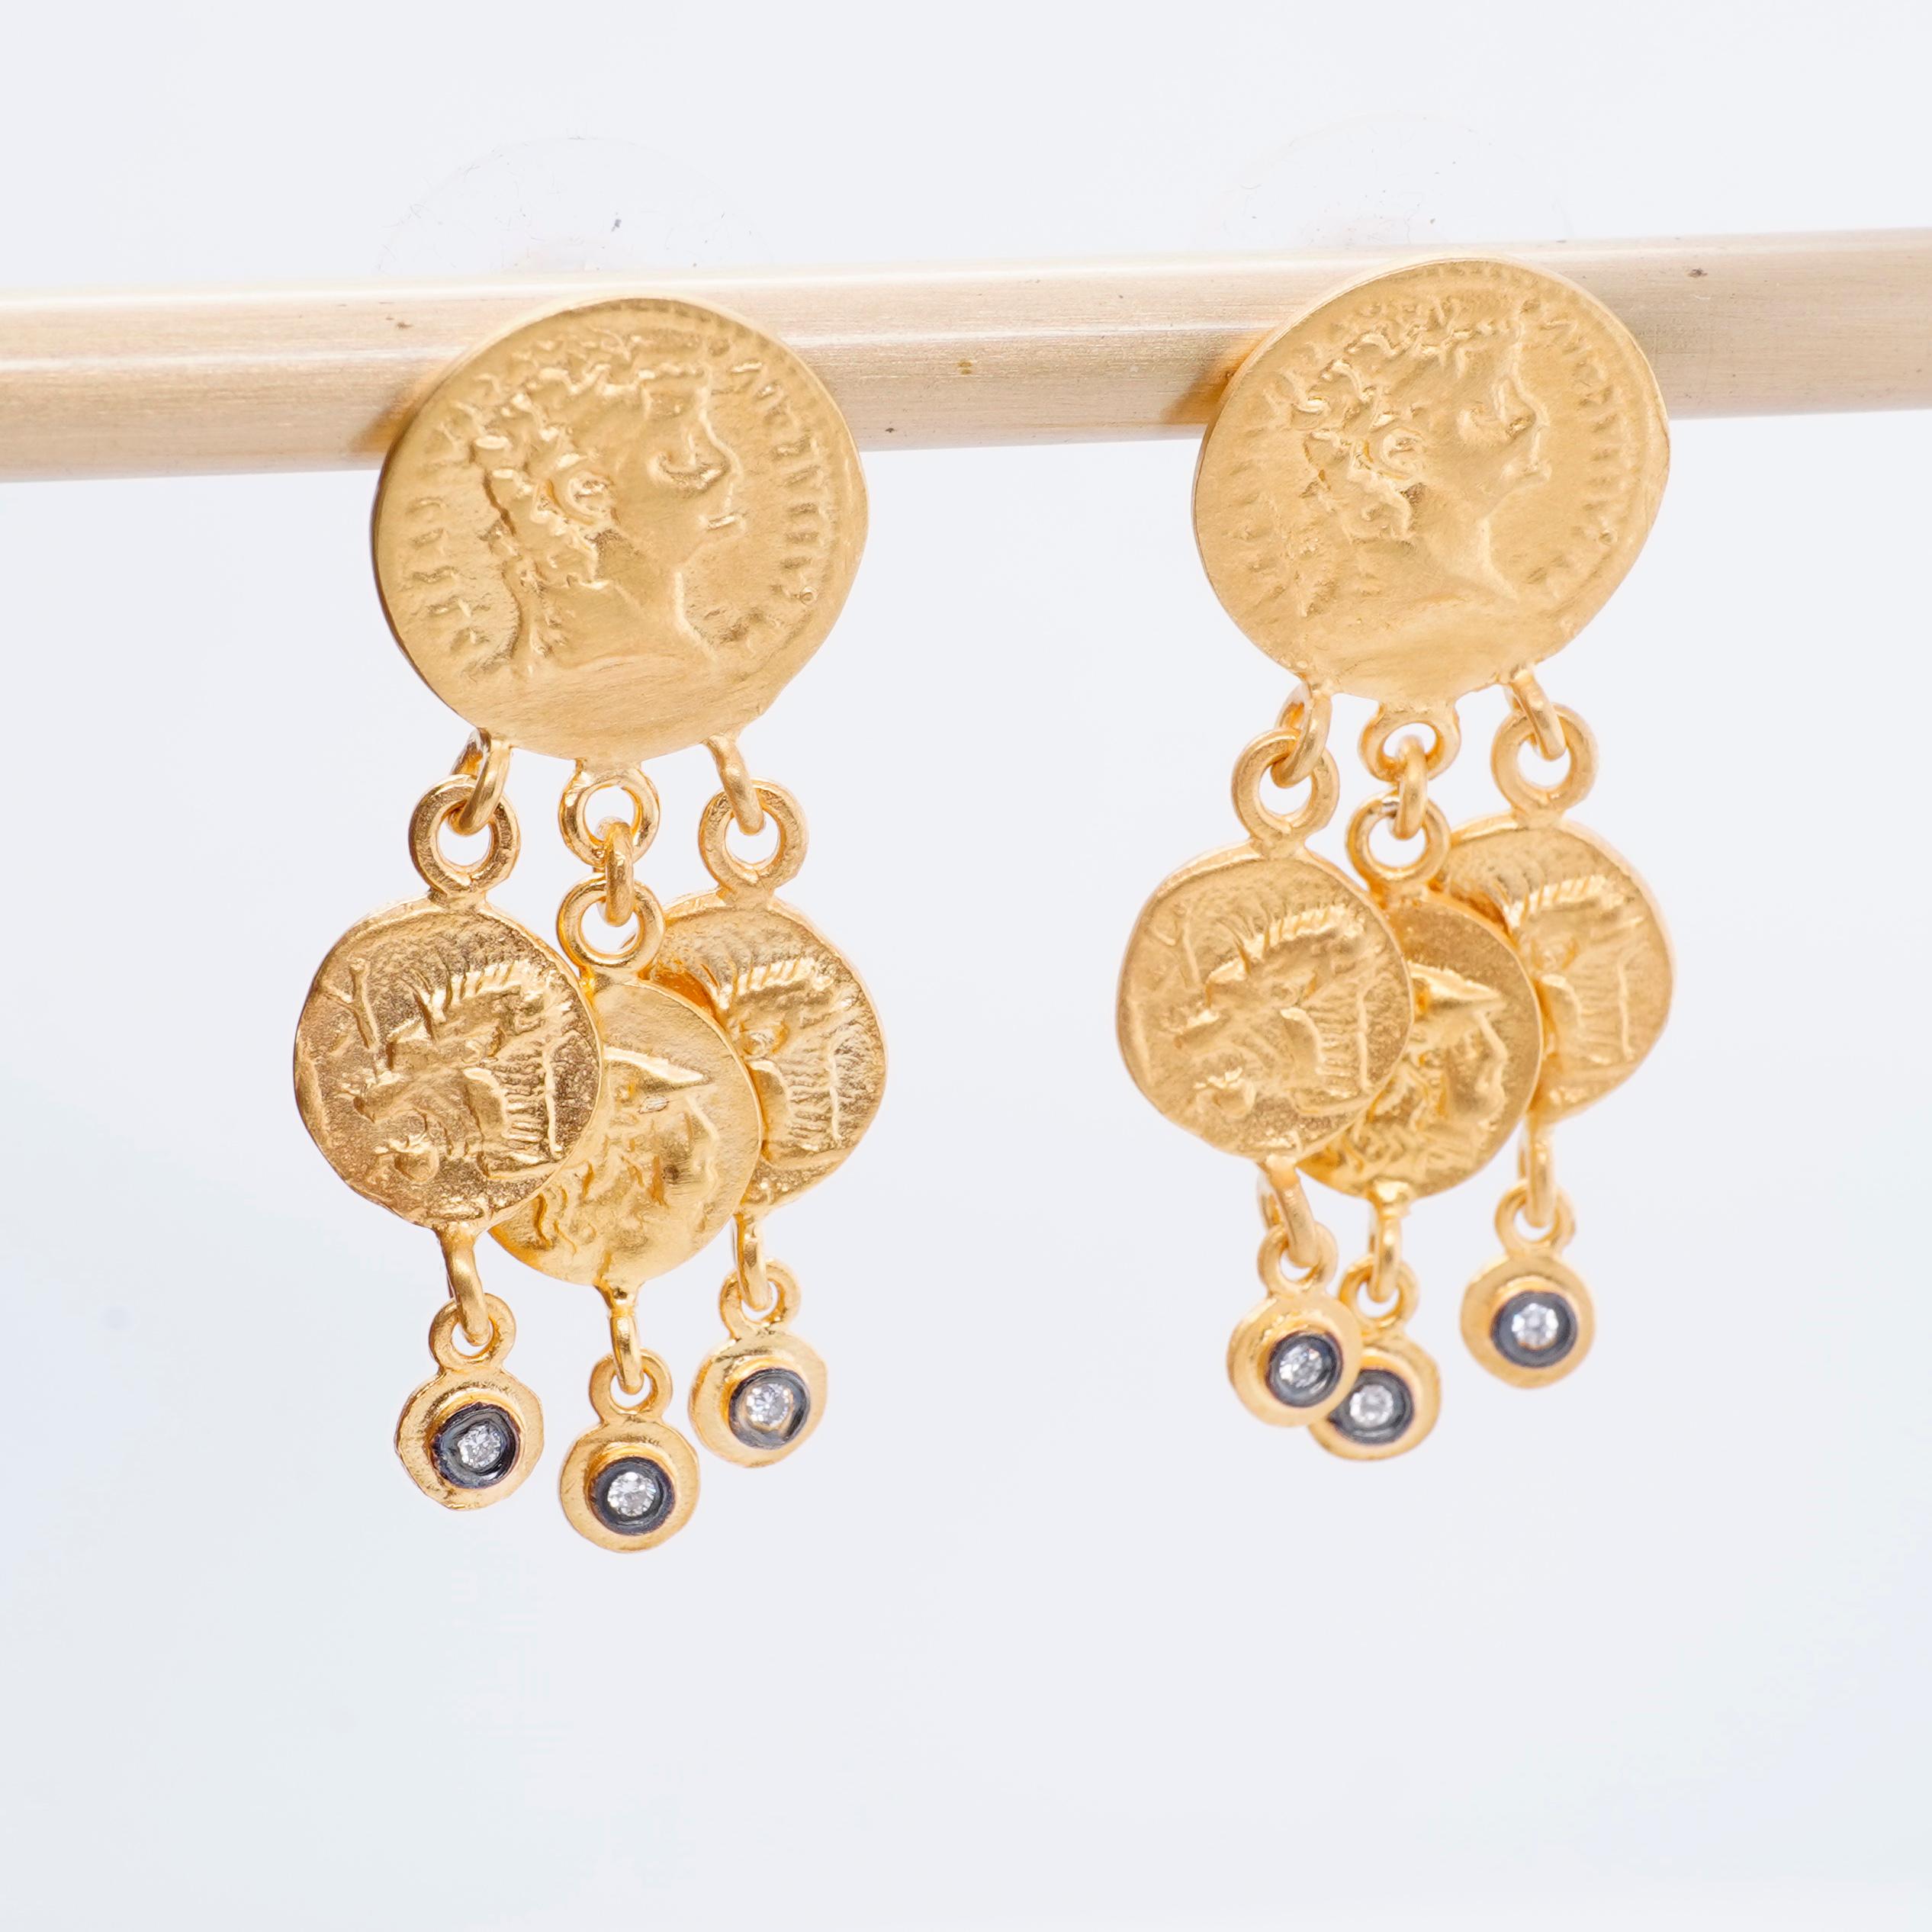 Diamond 24K Gold Chandelier Byzantine Coin Earrings by Kurtulan Jewellery In New Condition For Sale In Bozeman, MT